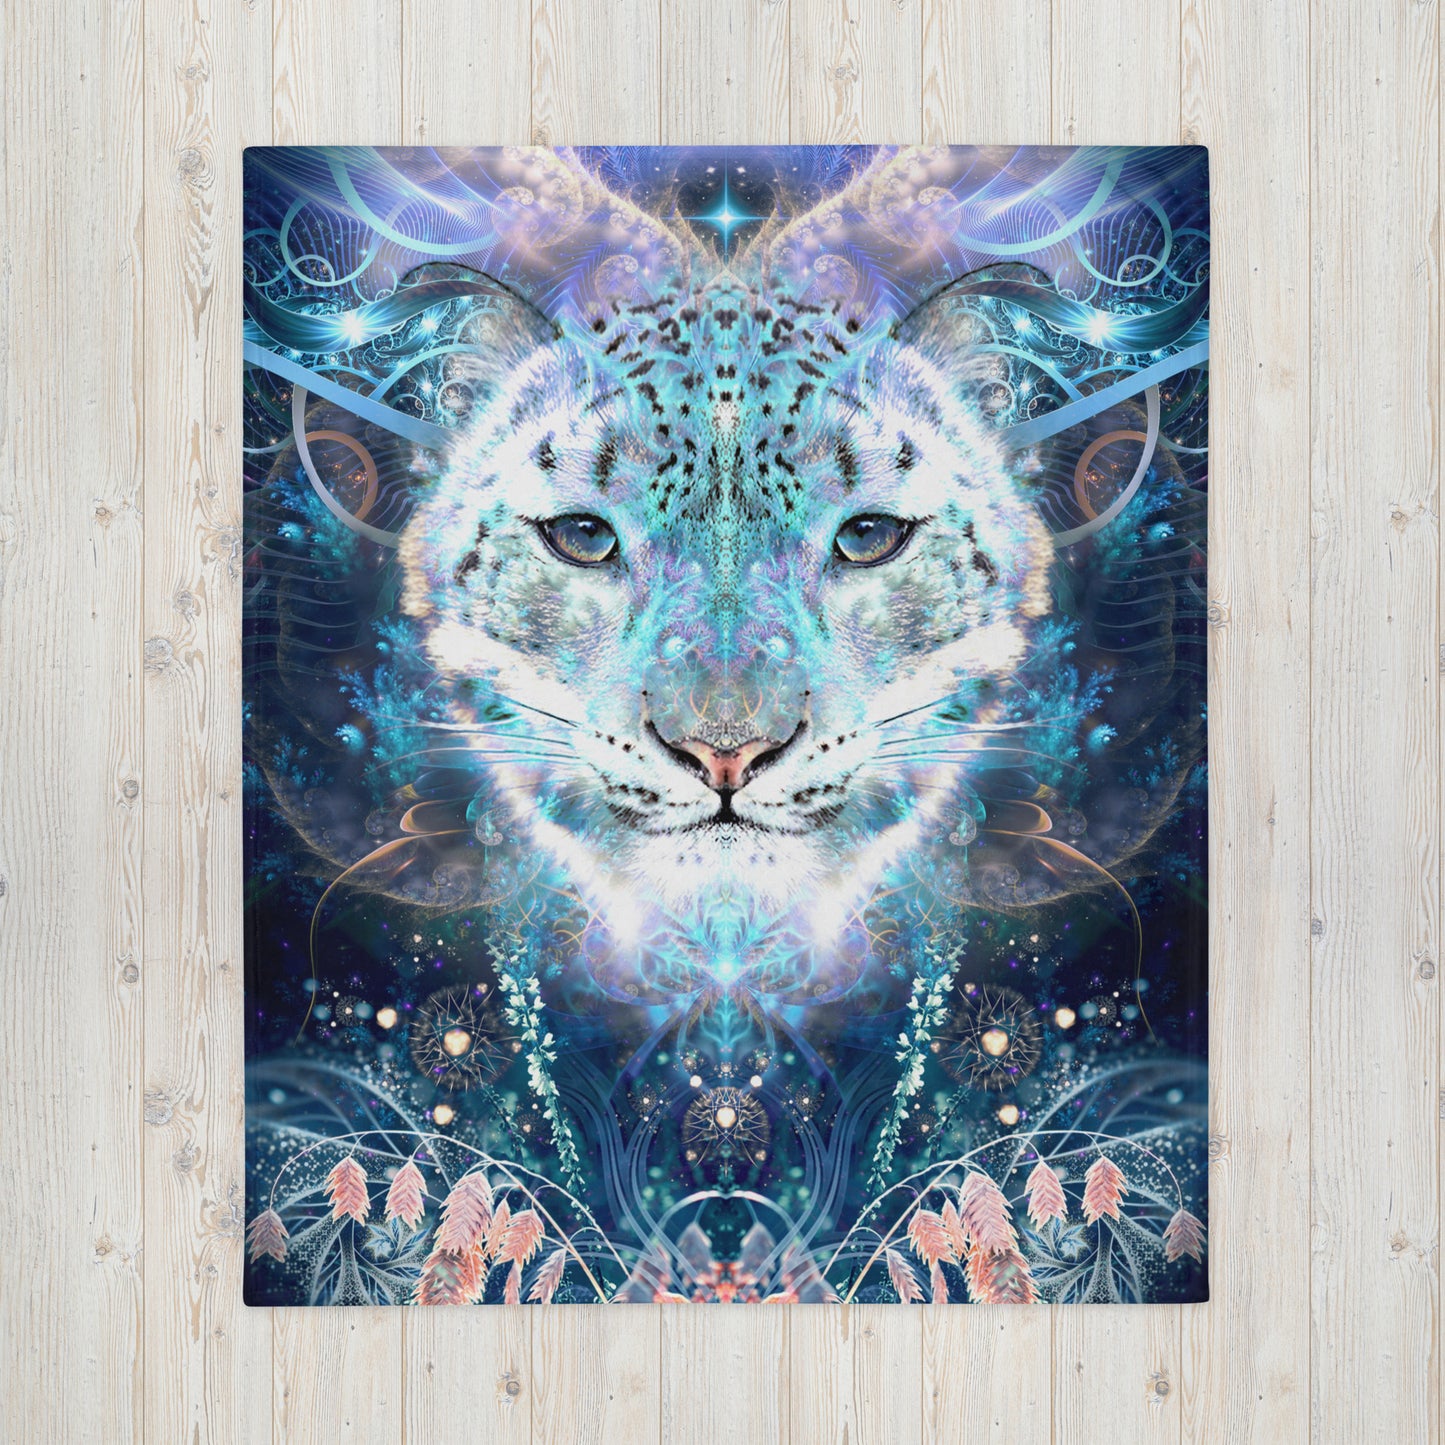 "Solitude" - Snow Leopard THROW BLANKET / TAPESTRY